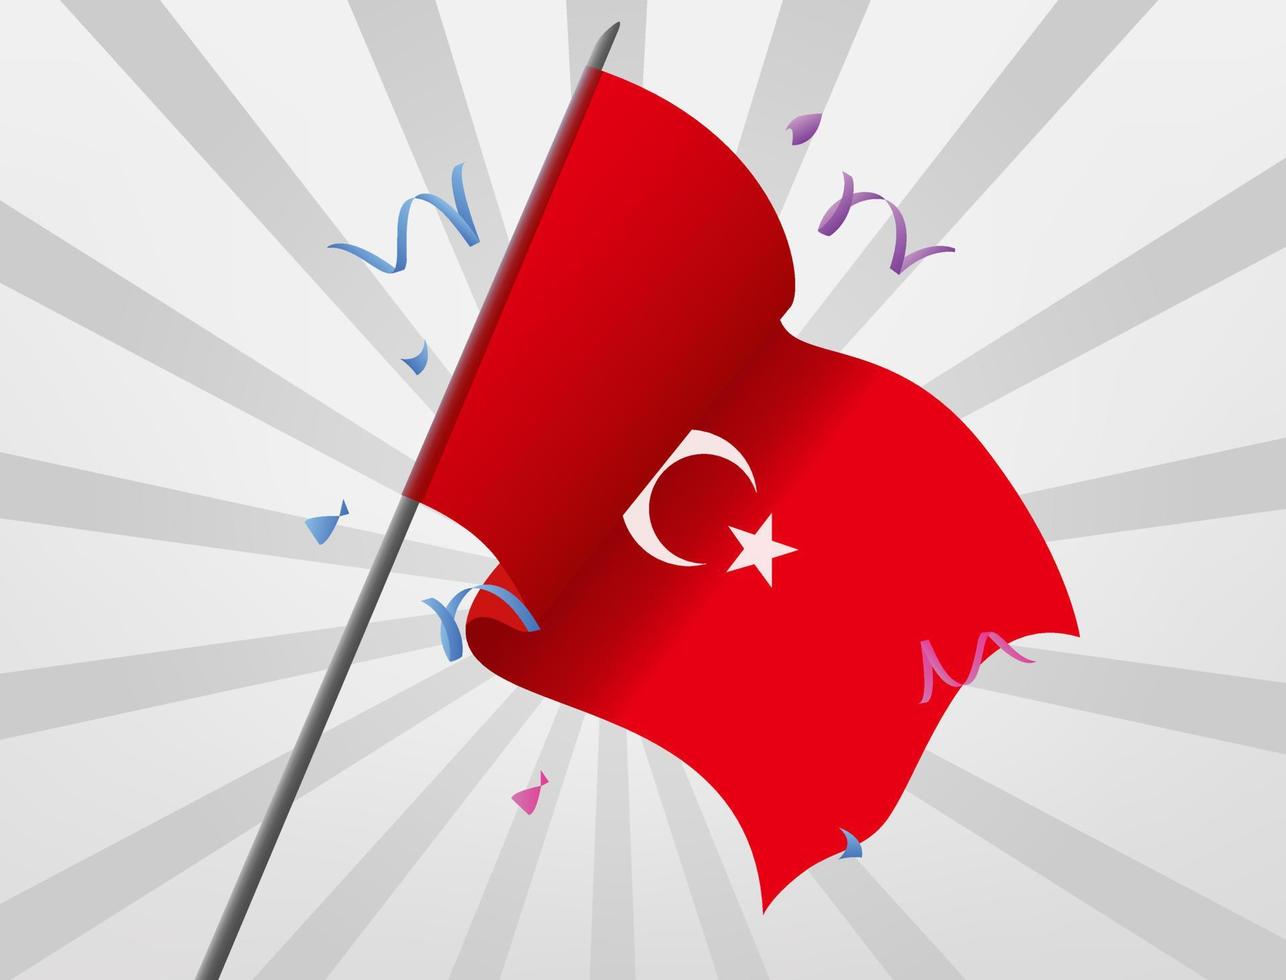 The celebratory flag of Turkey flies at height vector